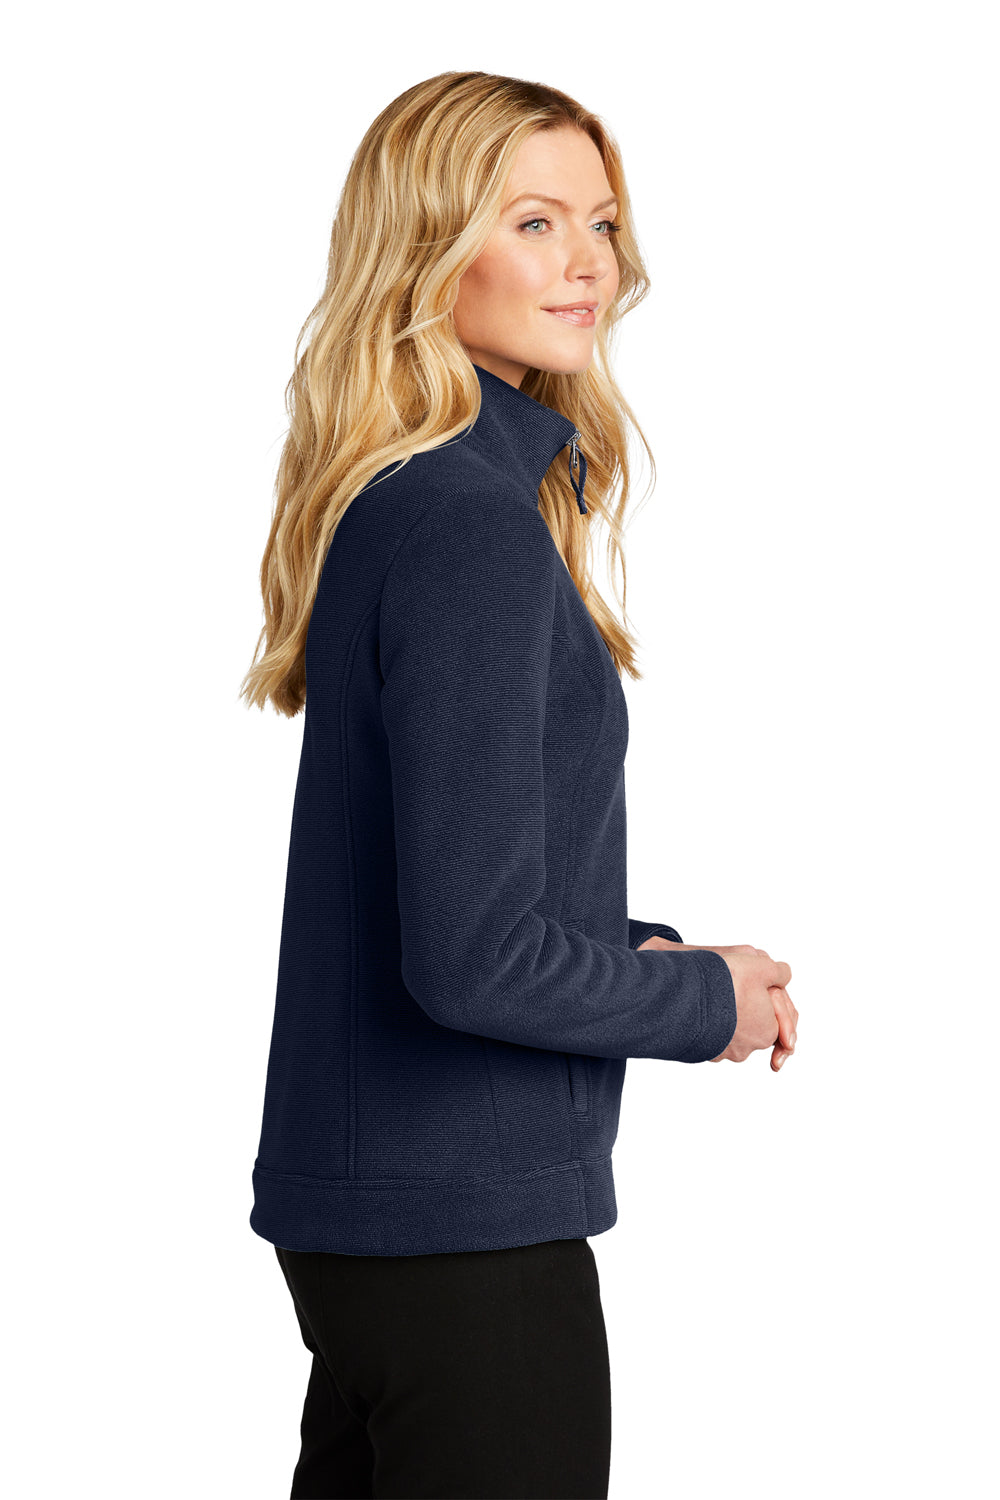 Port Authority Womens Ultra Warm Brushed Fleece Full Zip Jacket Insignia Blue/River Navy Blue Side